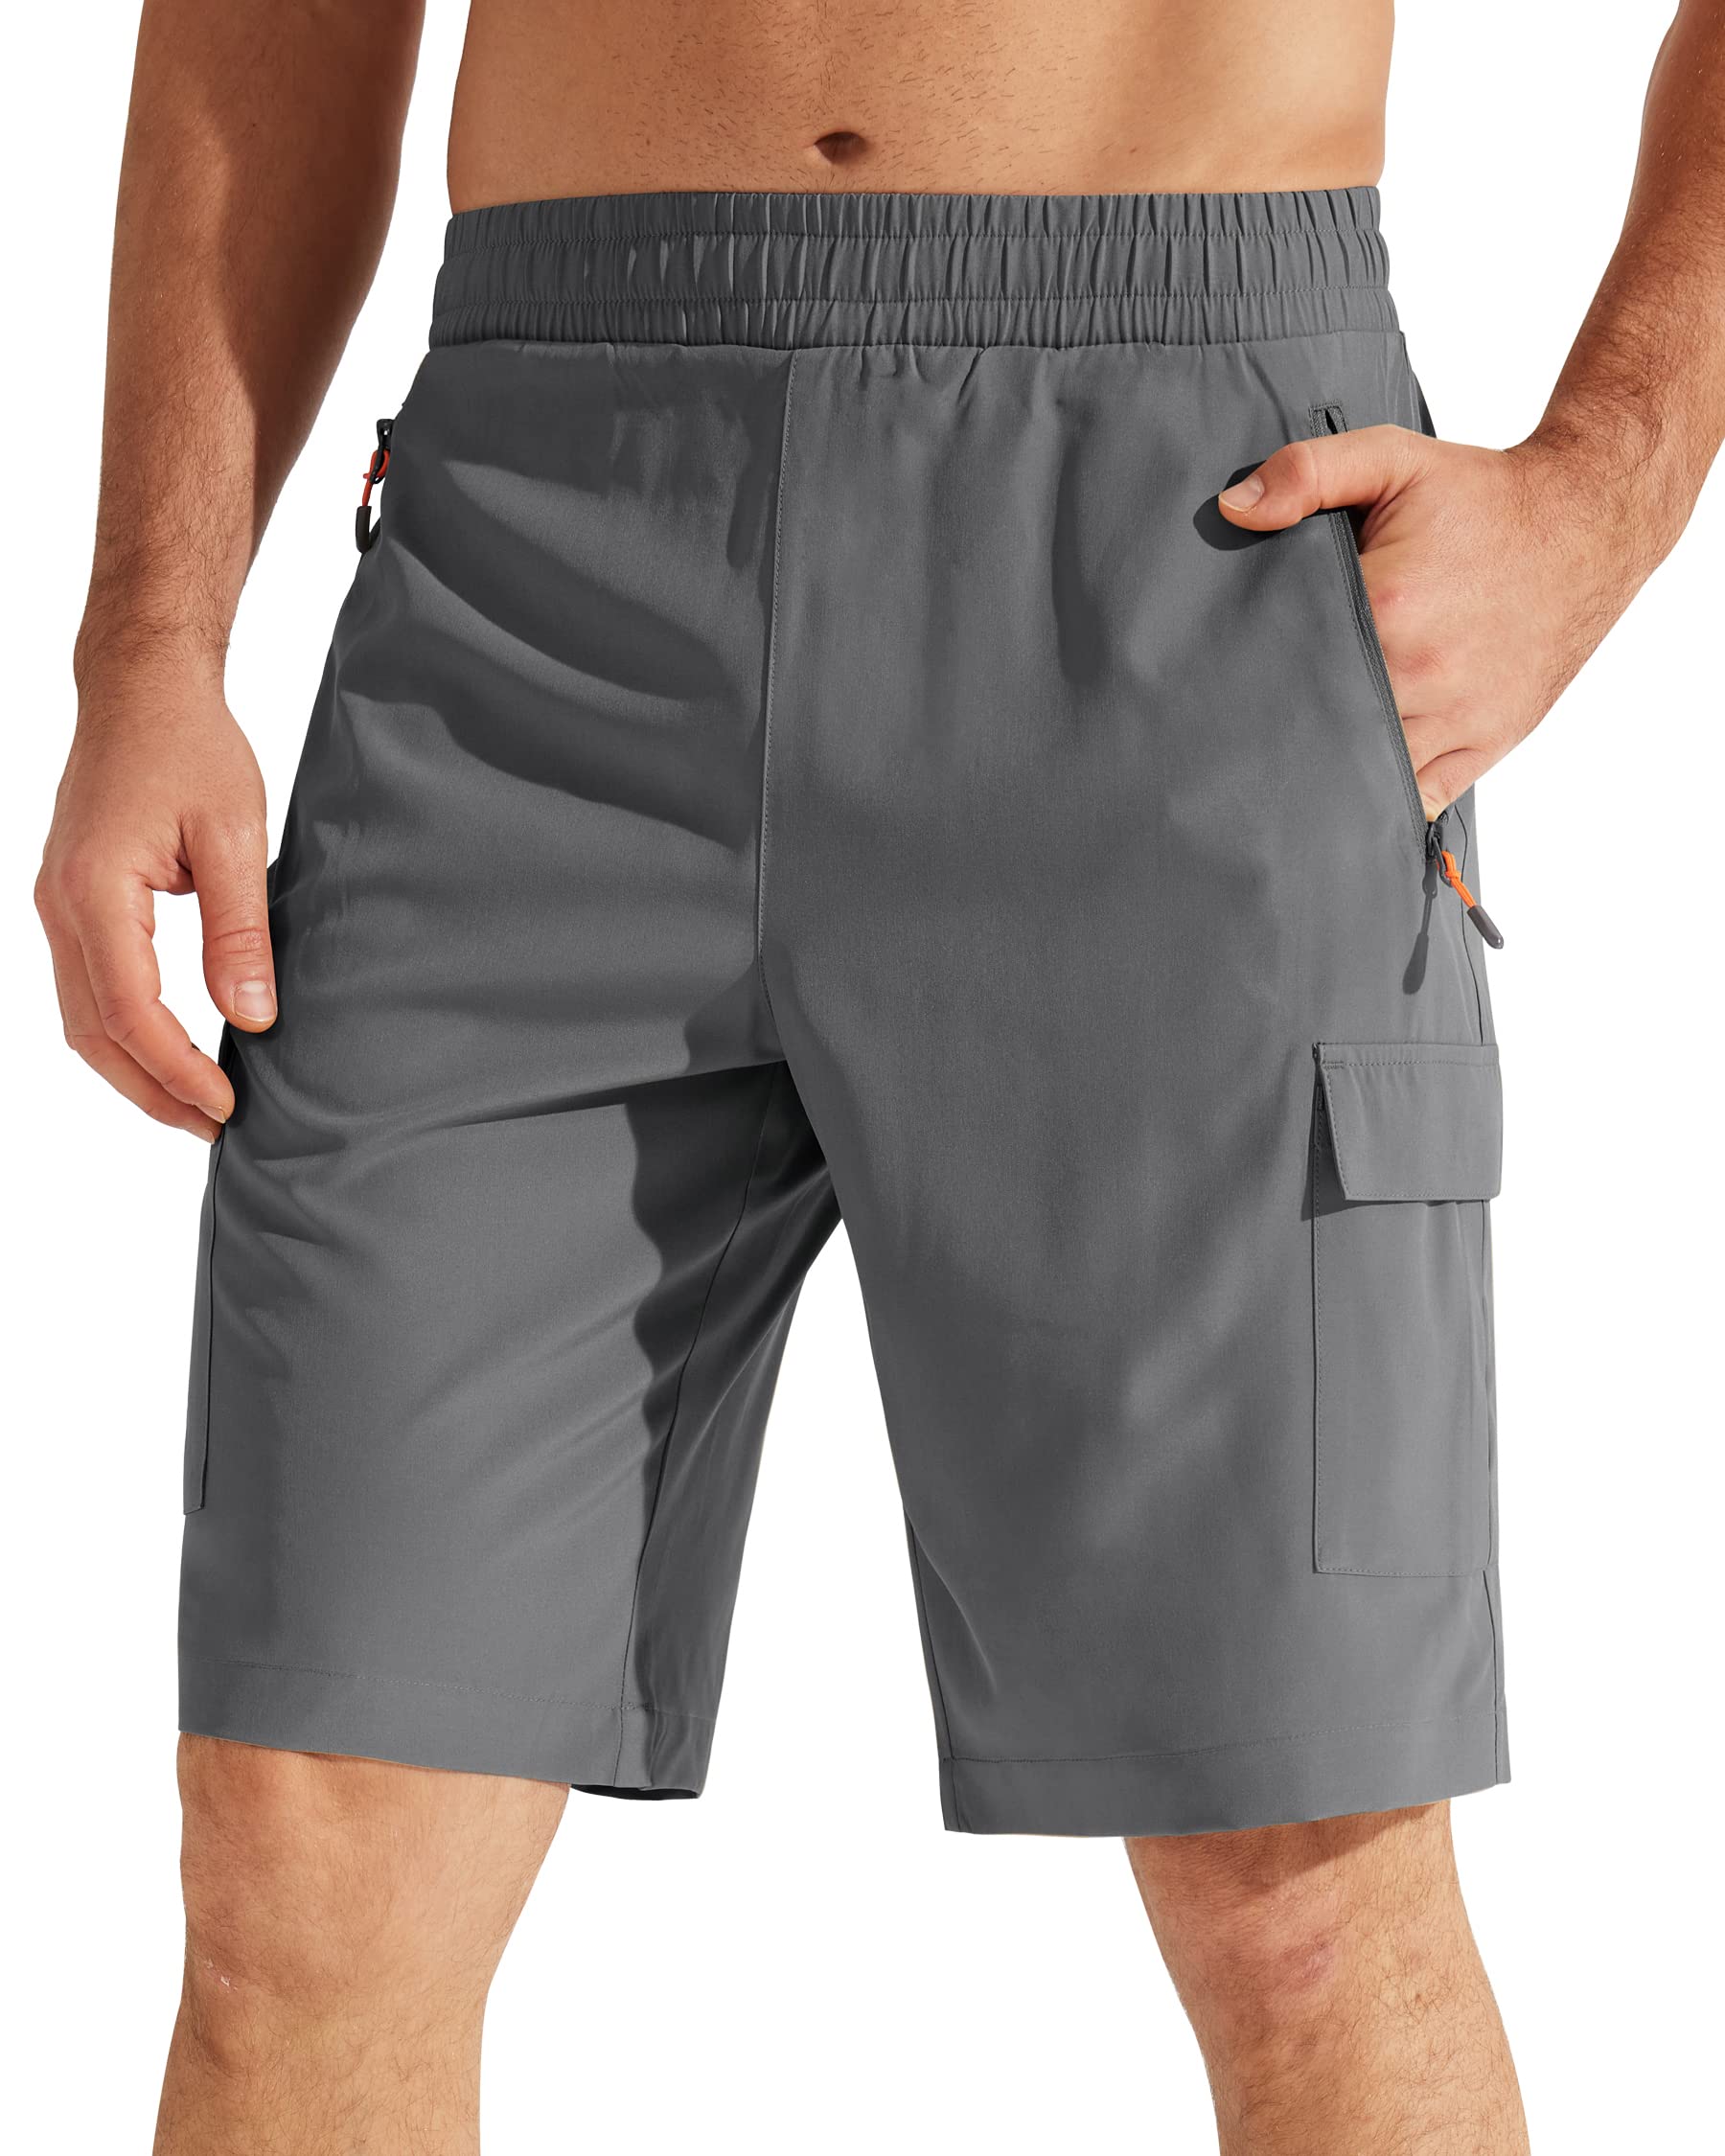 Aueoeo Baggy Shorts Men, Men's Casual Elastic Waist Cargo Shorts  Lightweight Quick Dry Hiking Shorts Button Zipper Cotton Linen Shorts with  Pockets 